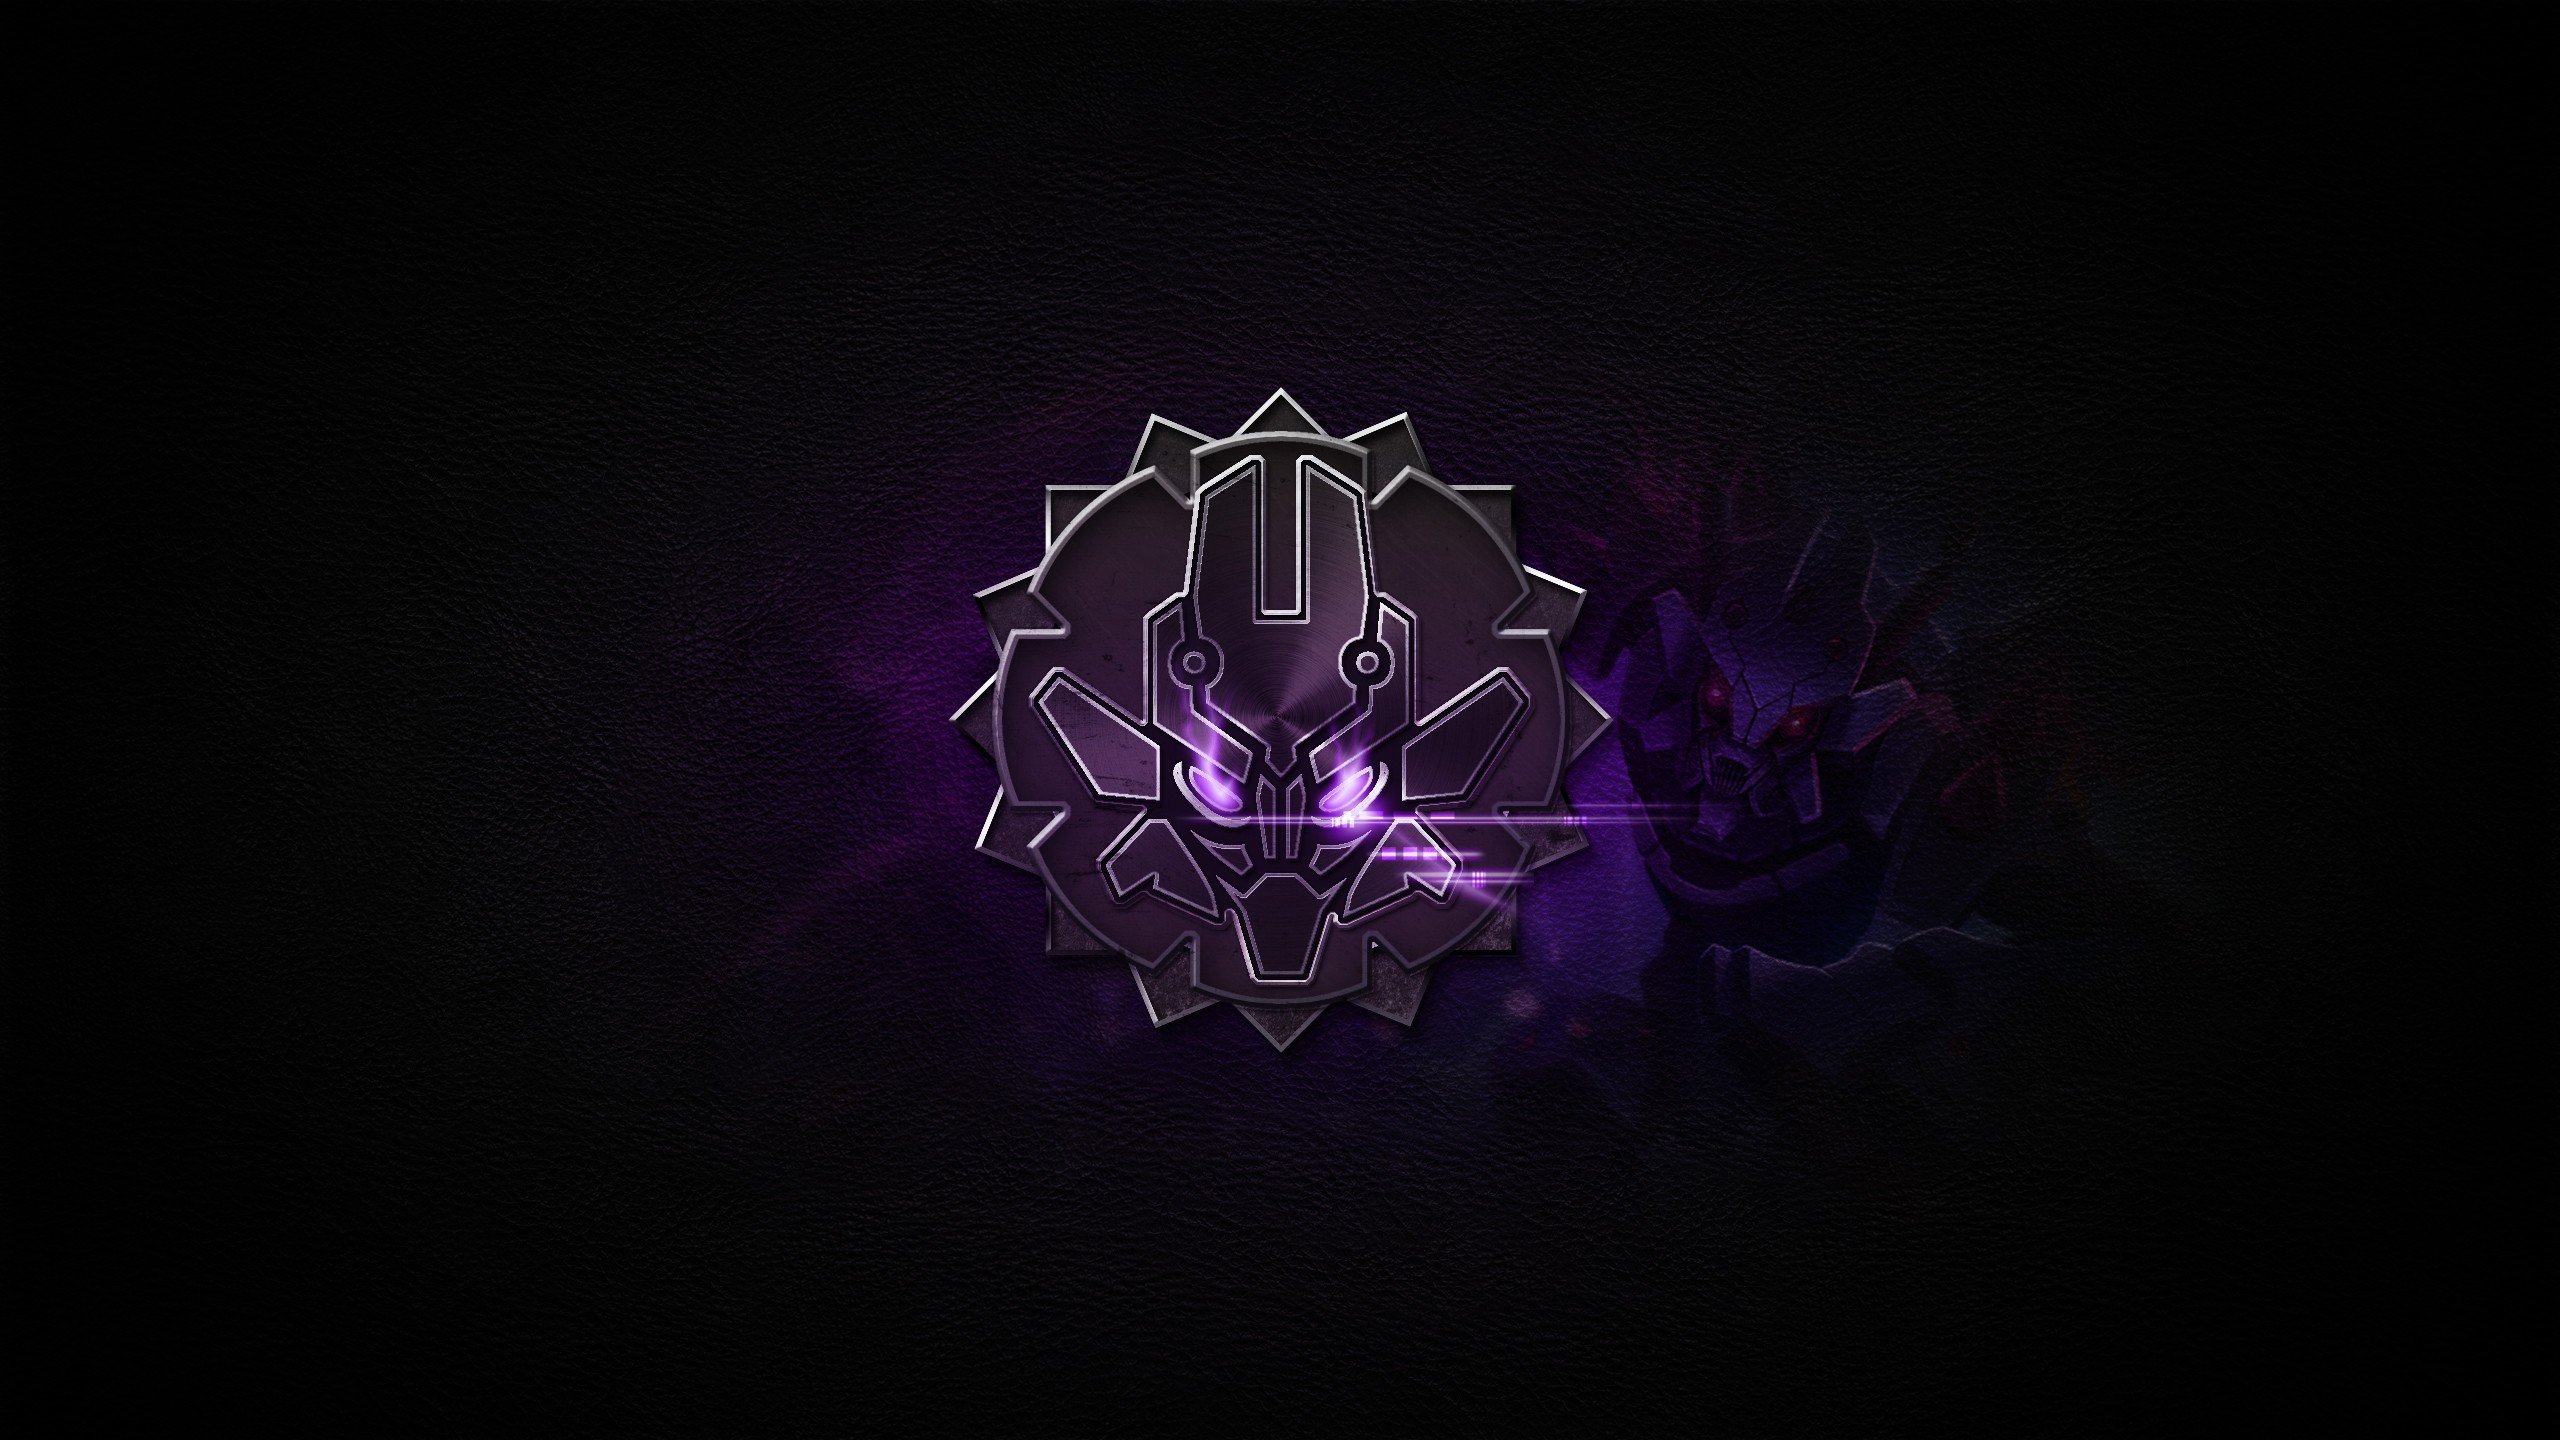 General 2560x1440 Riot Games League of Legends PC gaming